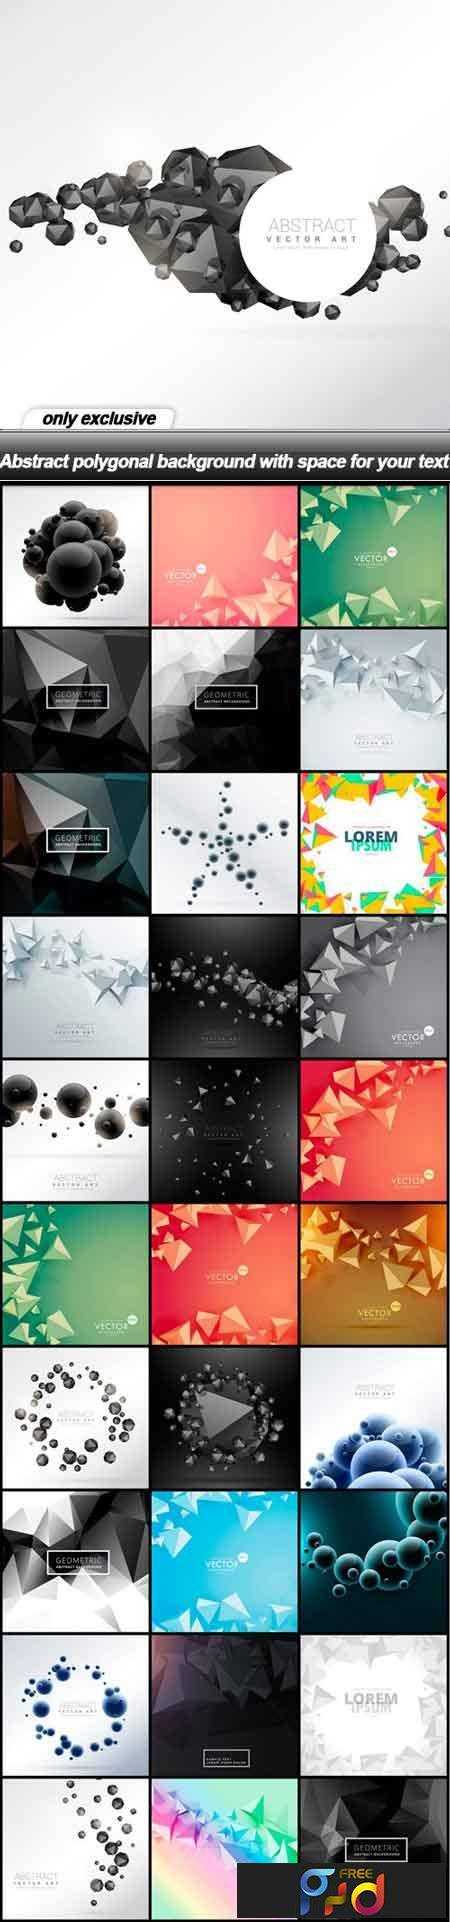 freepsdvn-com_1477470614_abstract-polygonal-background-with-space-for-your-text-31-eps